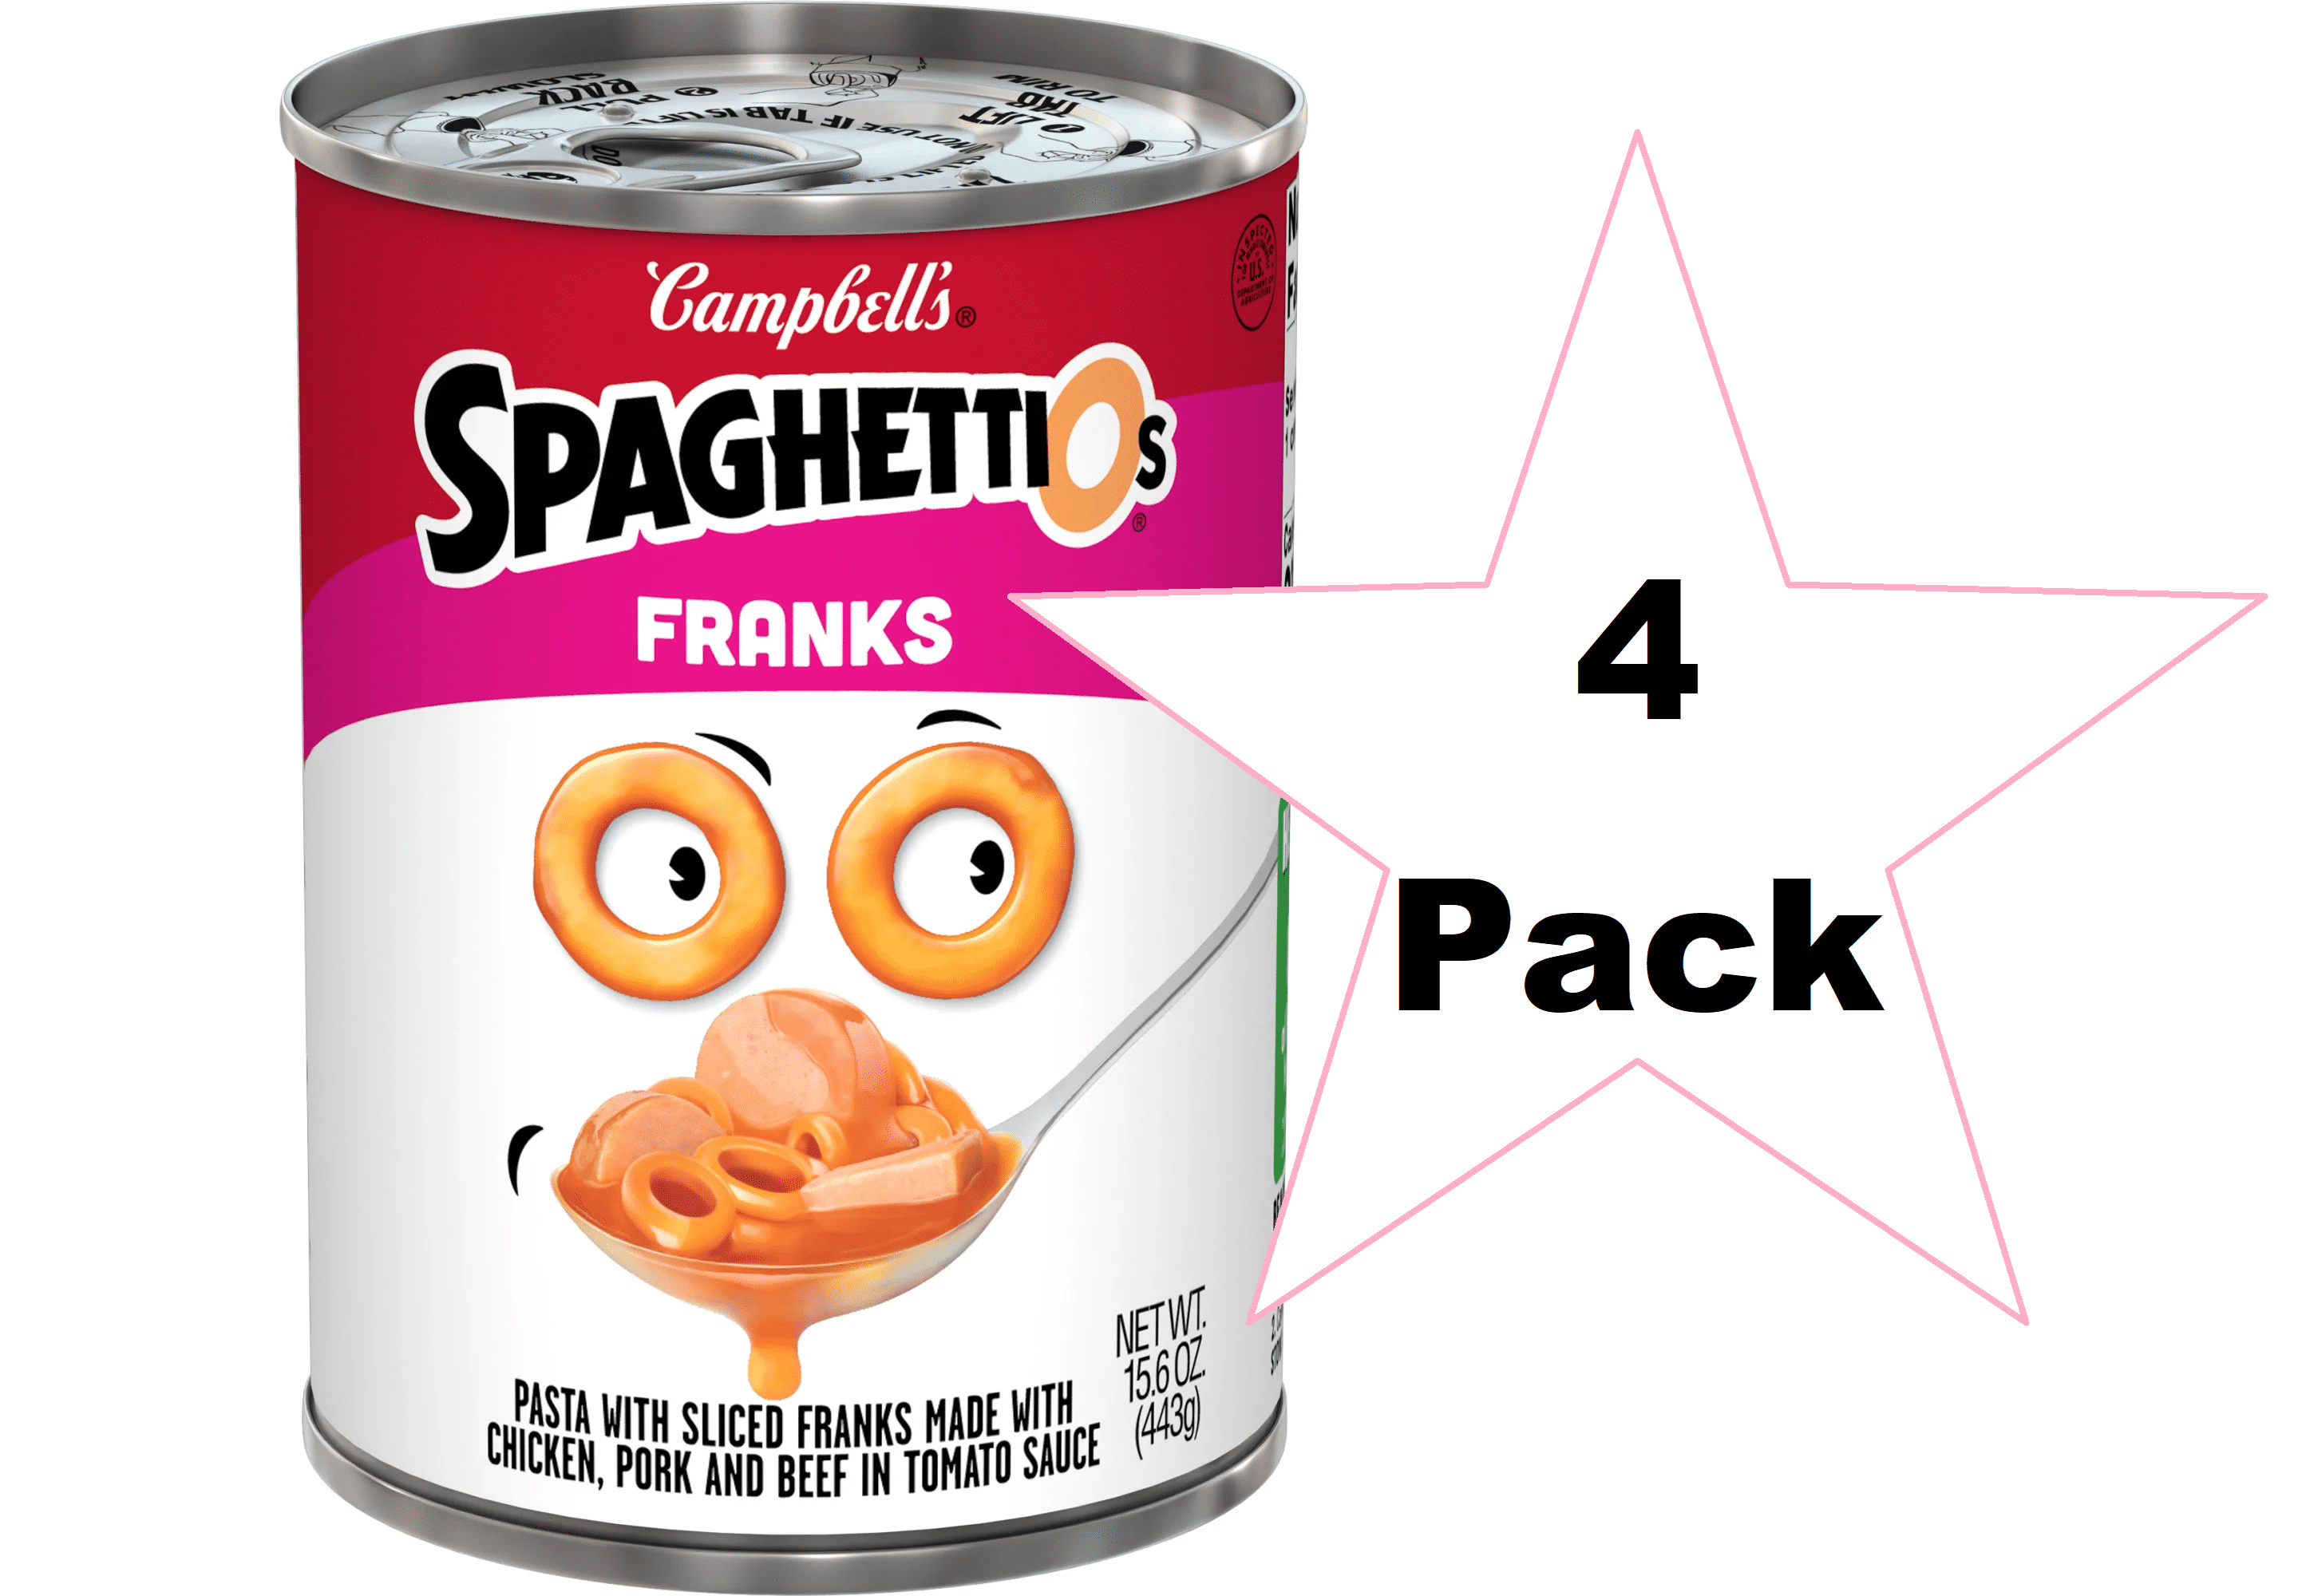 SpaghettiOs Packs on the Heat With Frank's RedHot Sauce for a